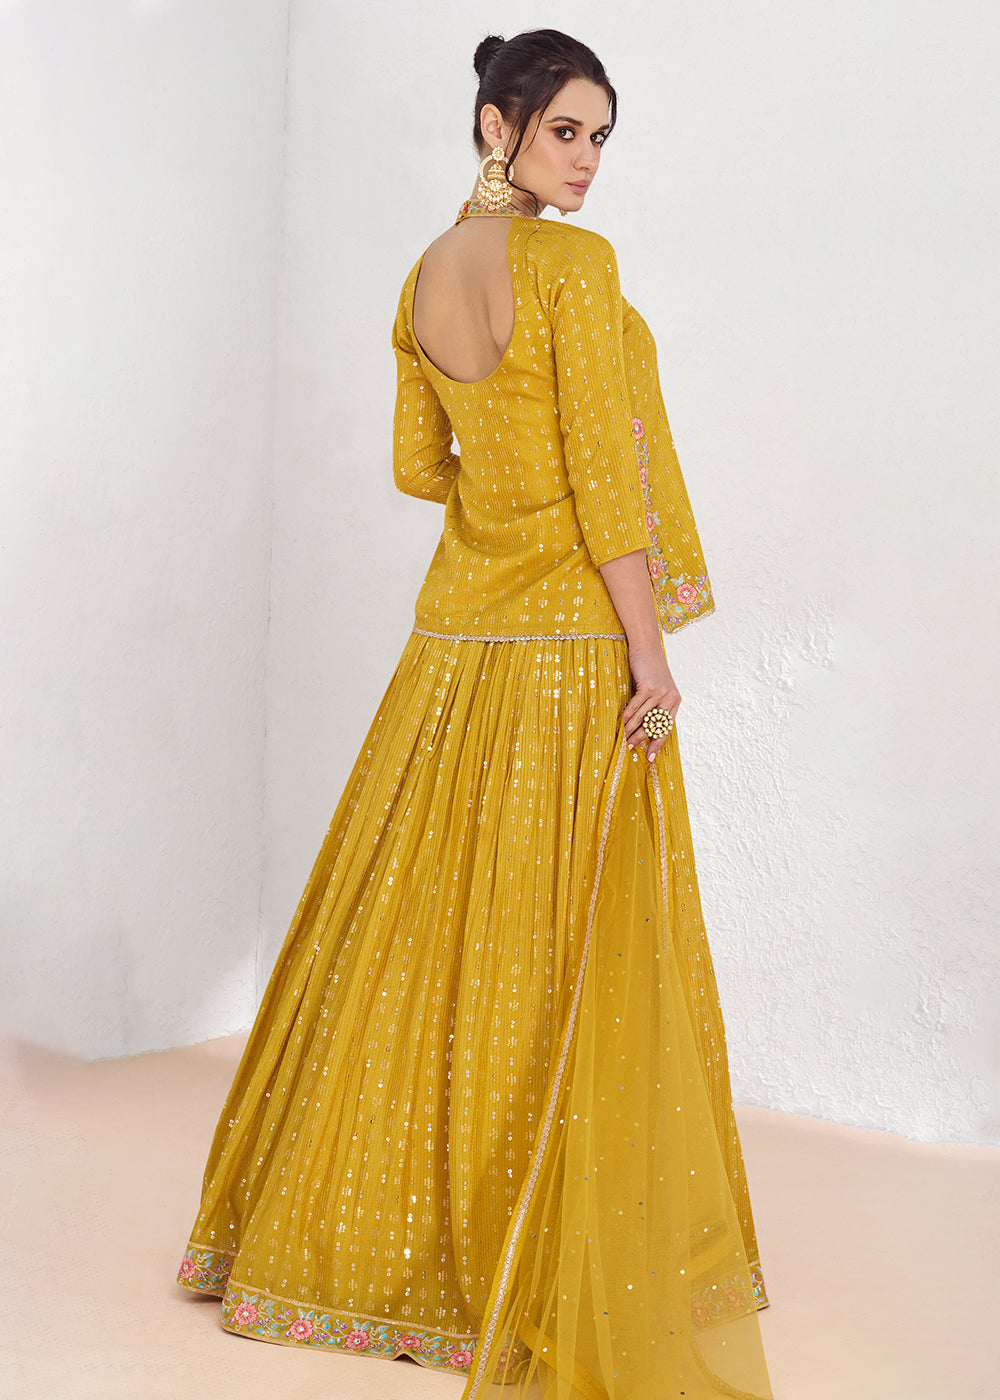 Buy Now Real Georgette Yellow Embroidered Kurti Style Lehenga Suit Online in USA, UK, Canada & Worldwide at Empress Clothing.